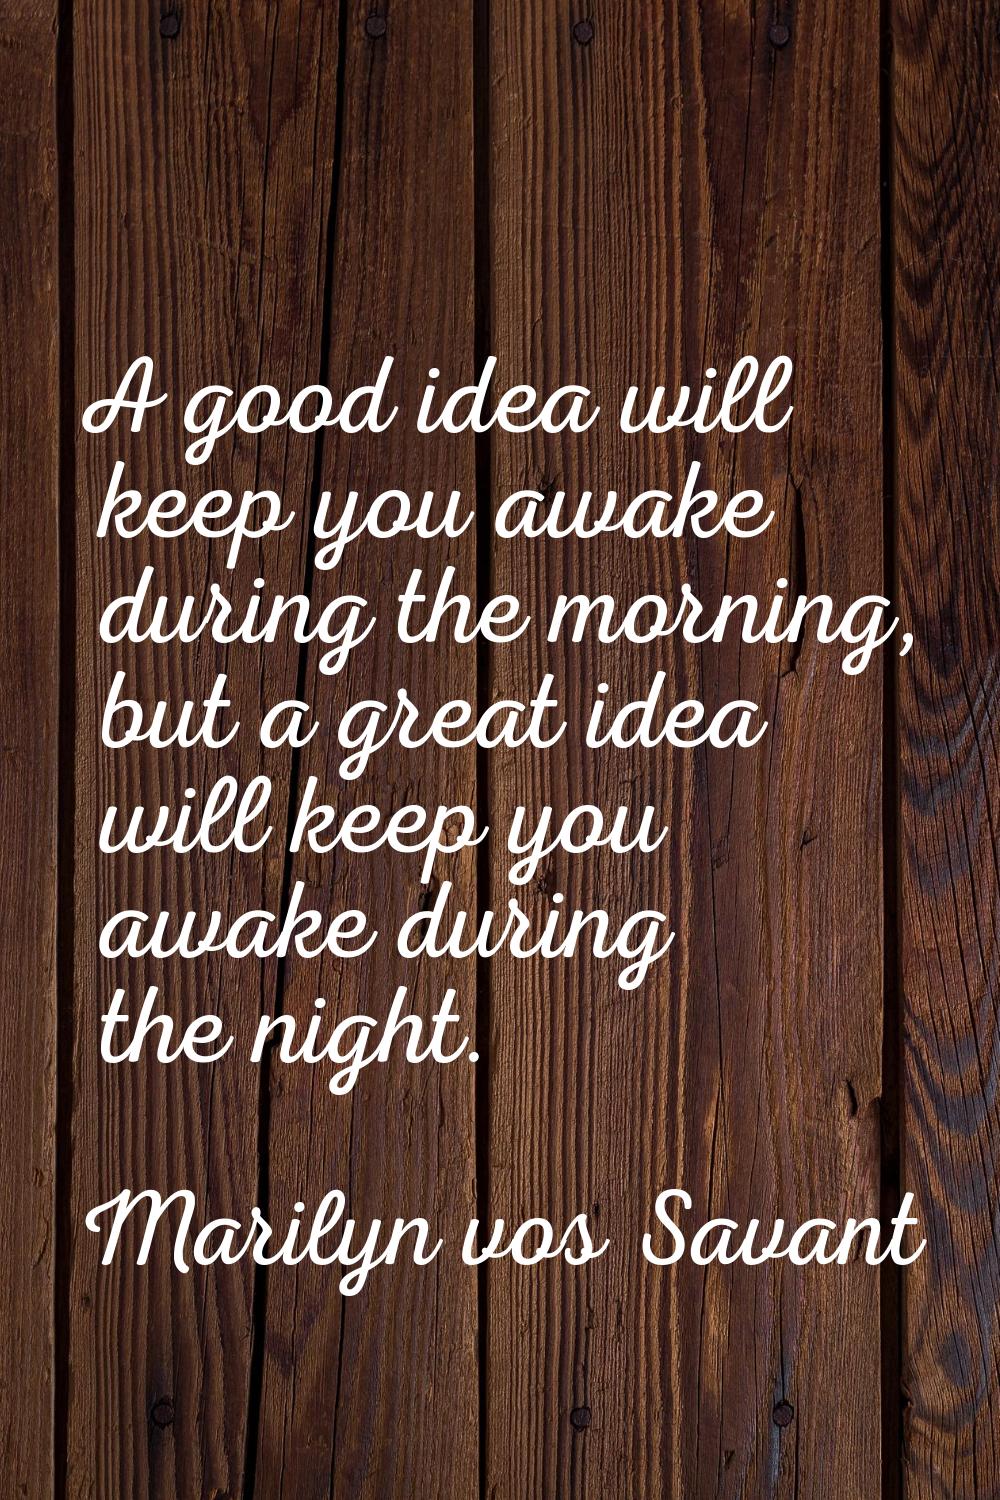 A good idea will keep you awake during the morning, but a great idea will keep you awake during the